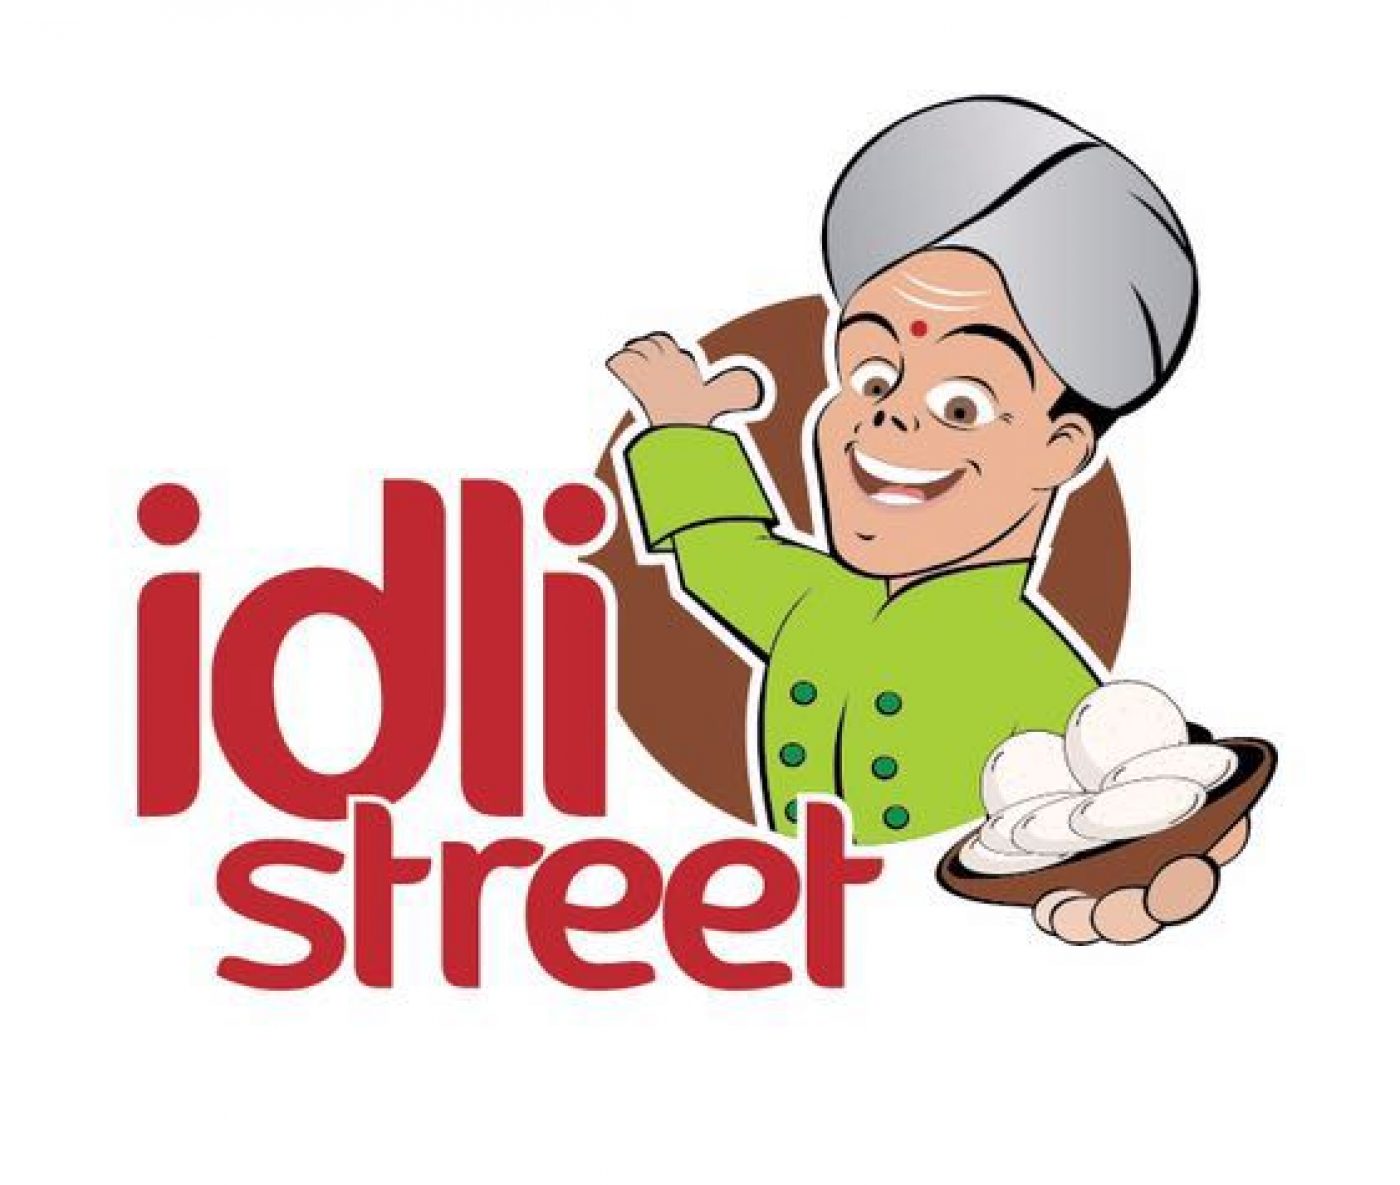 Lucrative south indian food franchising opportunities – Idli Street